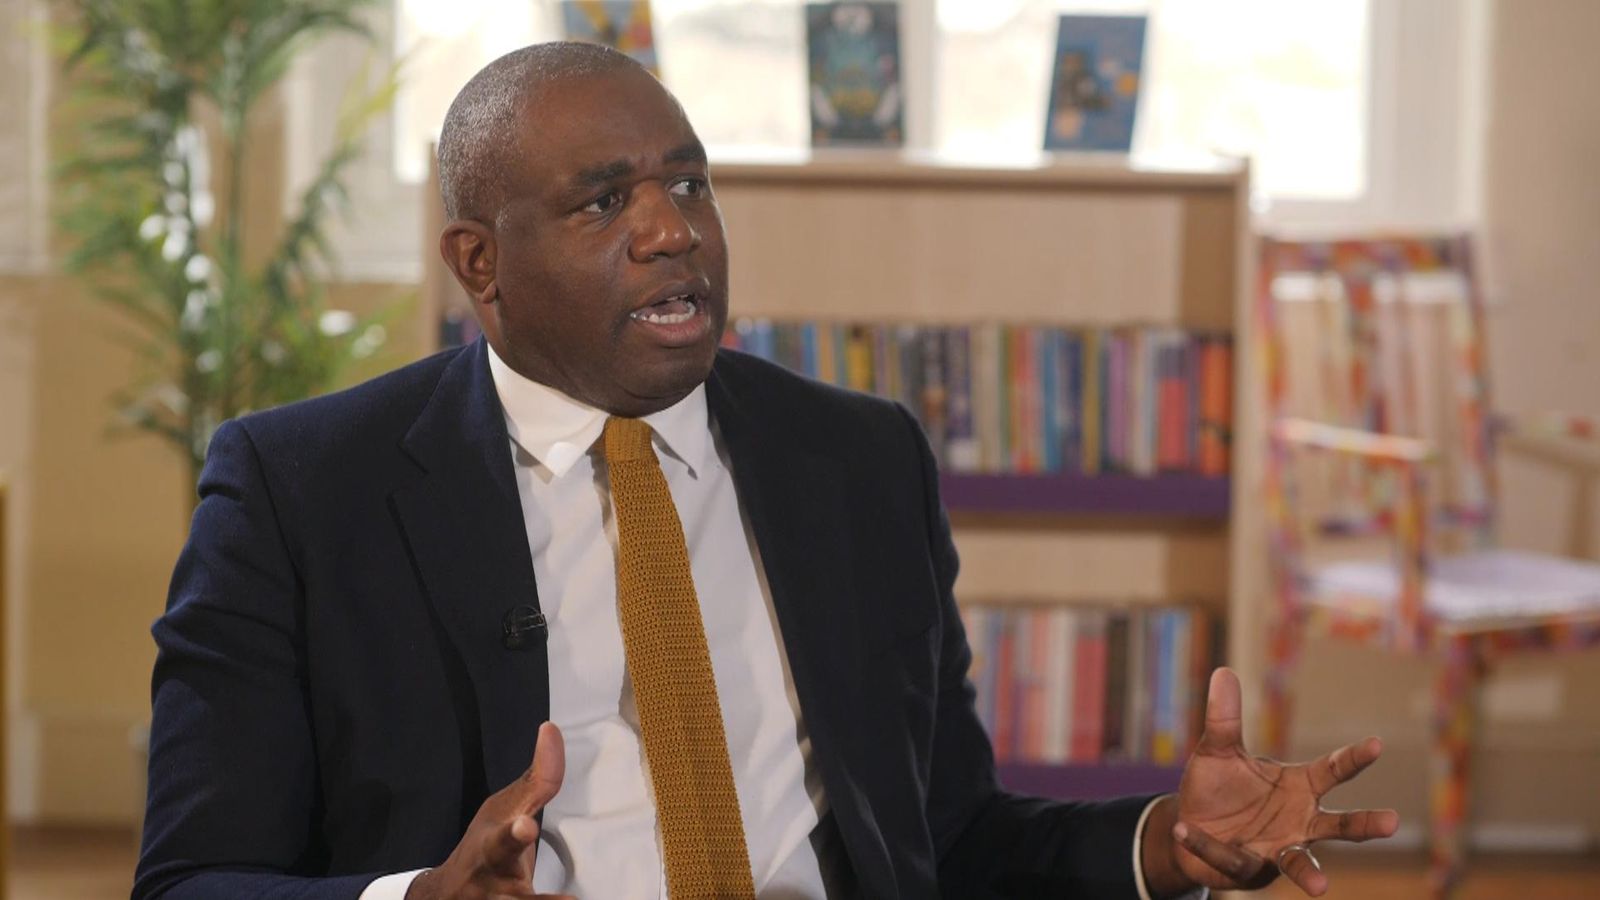 Beth Rigby Interviews: Labour's top second jobs earner David Lammy says he'll 'live with' any potential ban on outside income